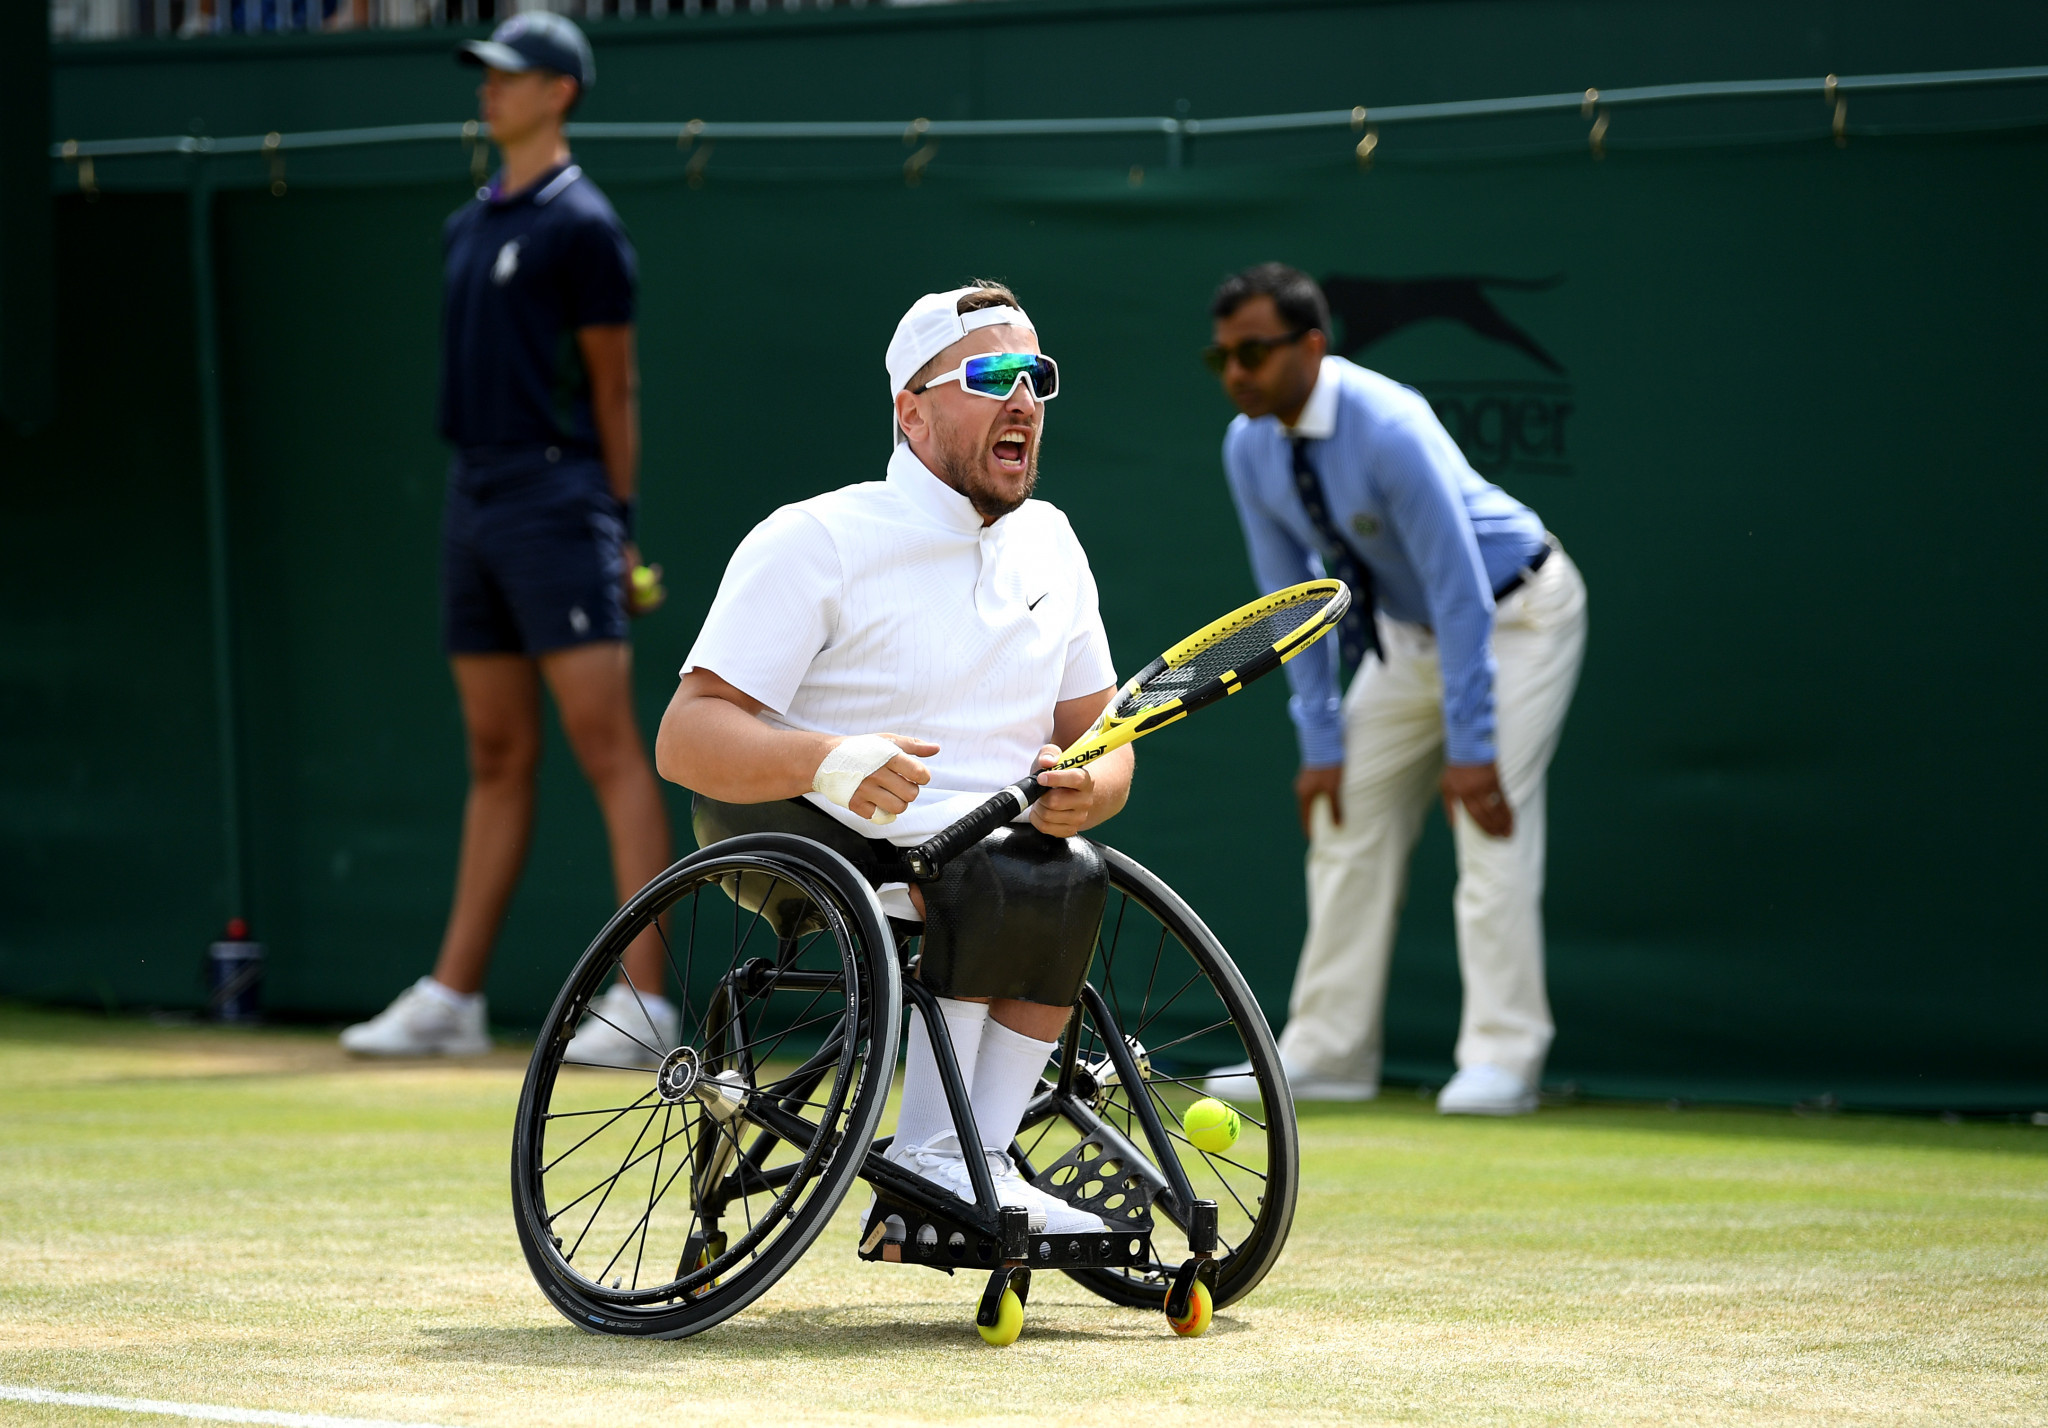 Dylan Alcott could claim two calendar Grand Slams in the quad singles and doubles ©Getty Images